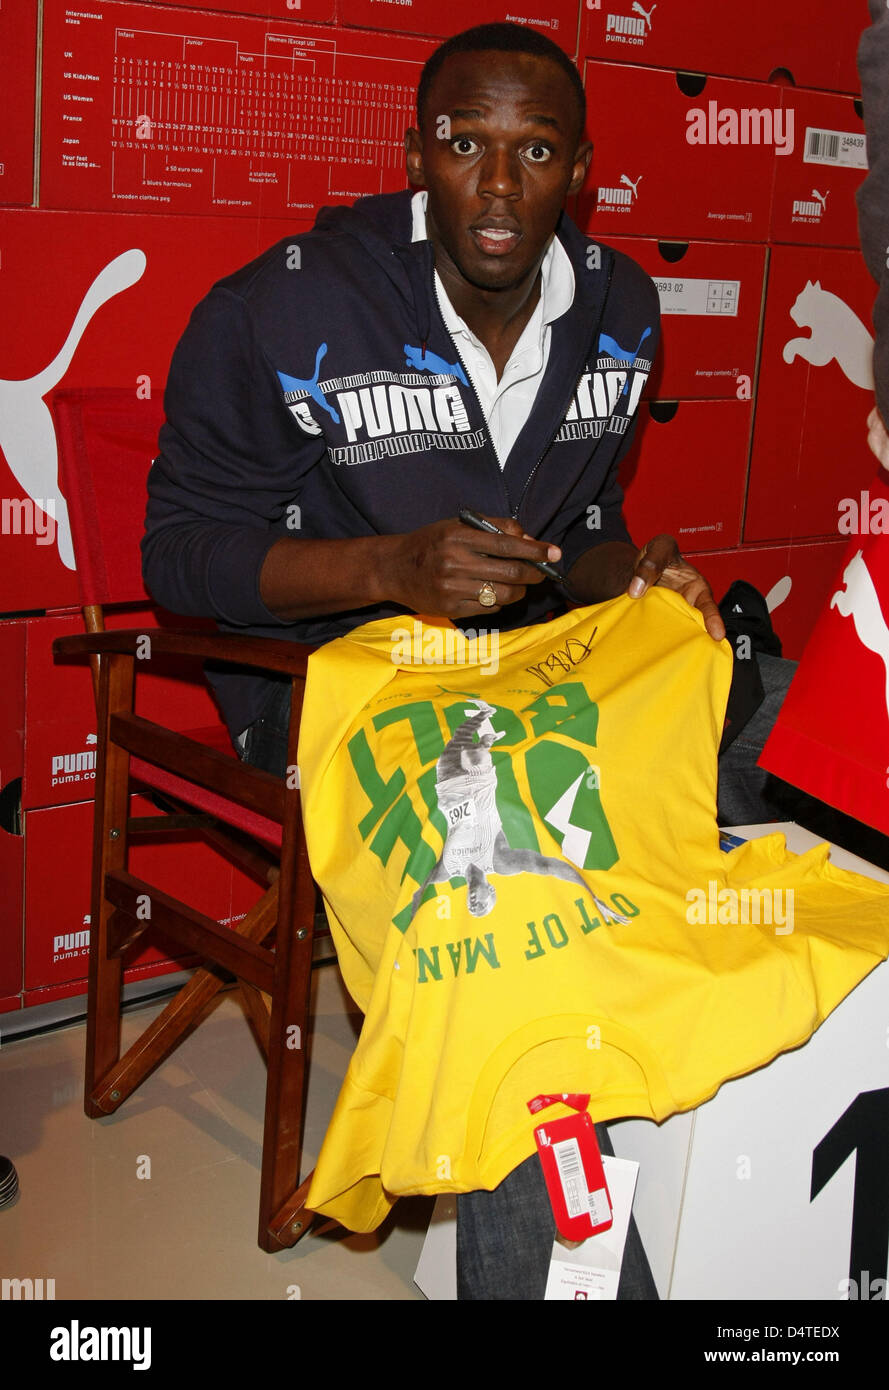 Jamaican sprint champion Usain Bolt visits the new Puma Outlet Store Stock  Photo - Alamy